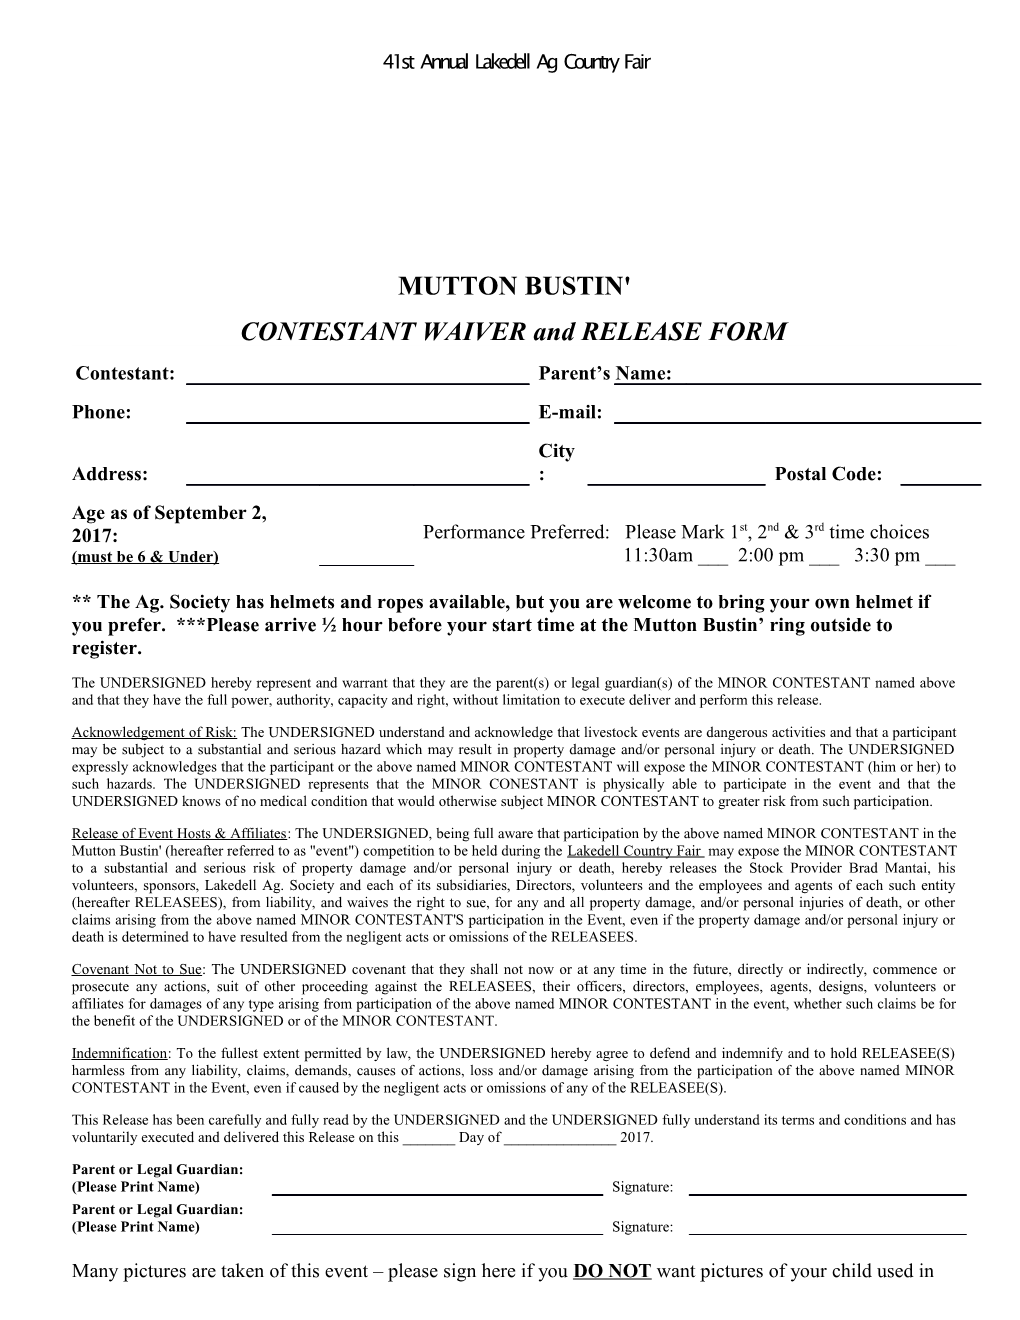 CONTESTANT WAIVER and RELEASE FORM